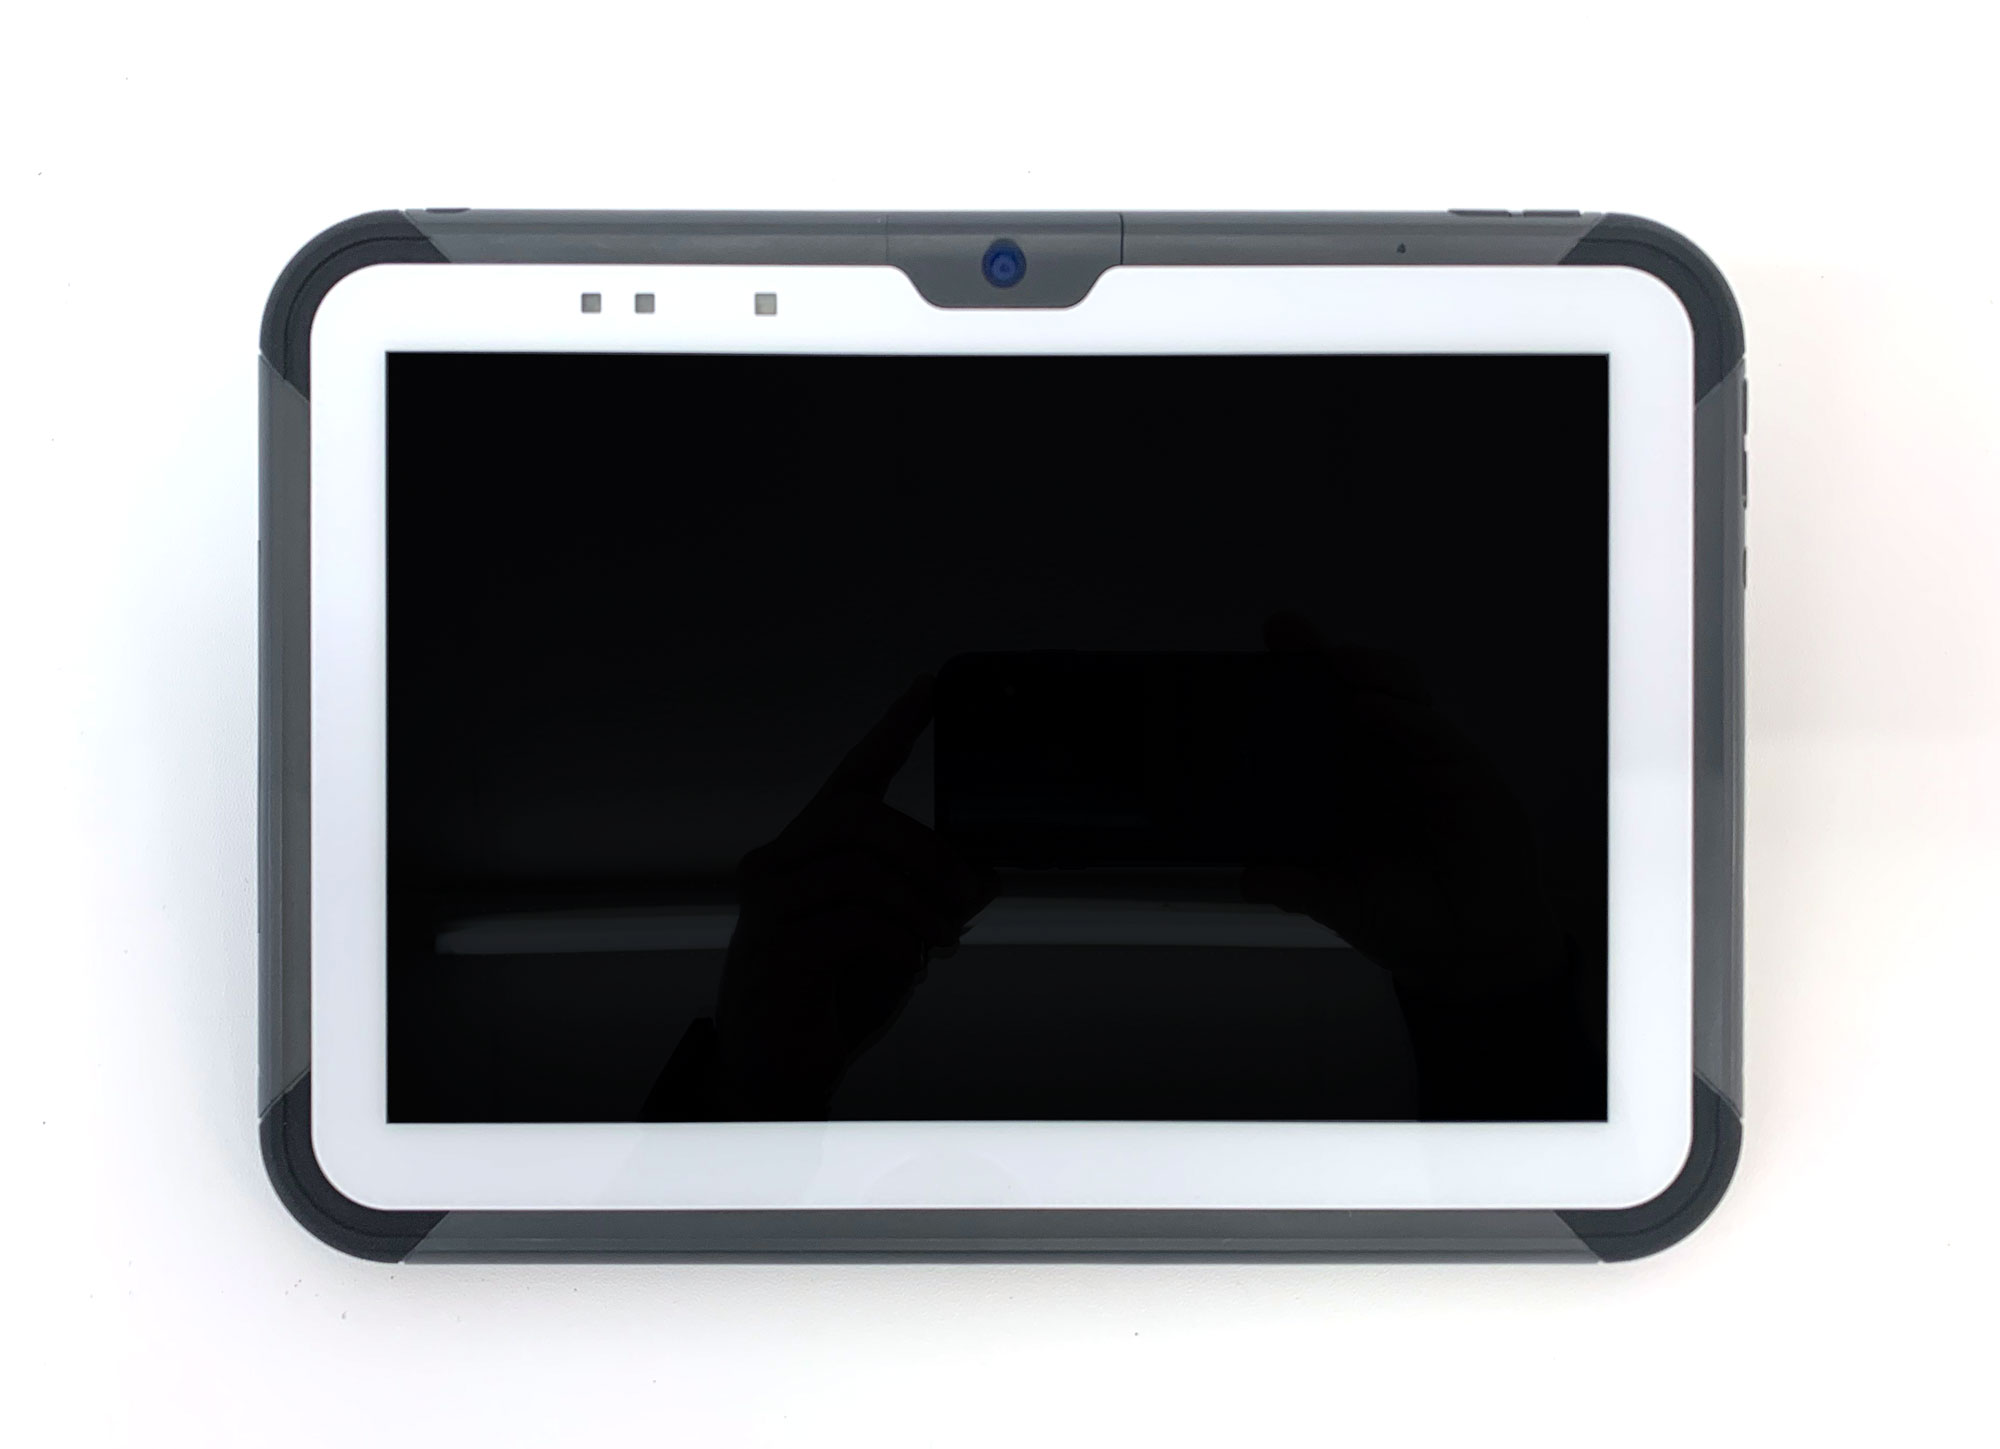 V-T500E - Industrie Tablet PC mit 10" Display